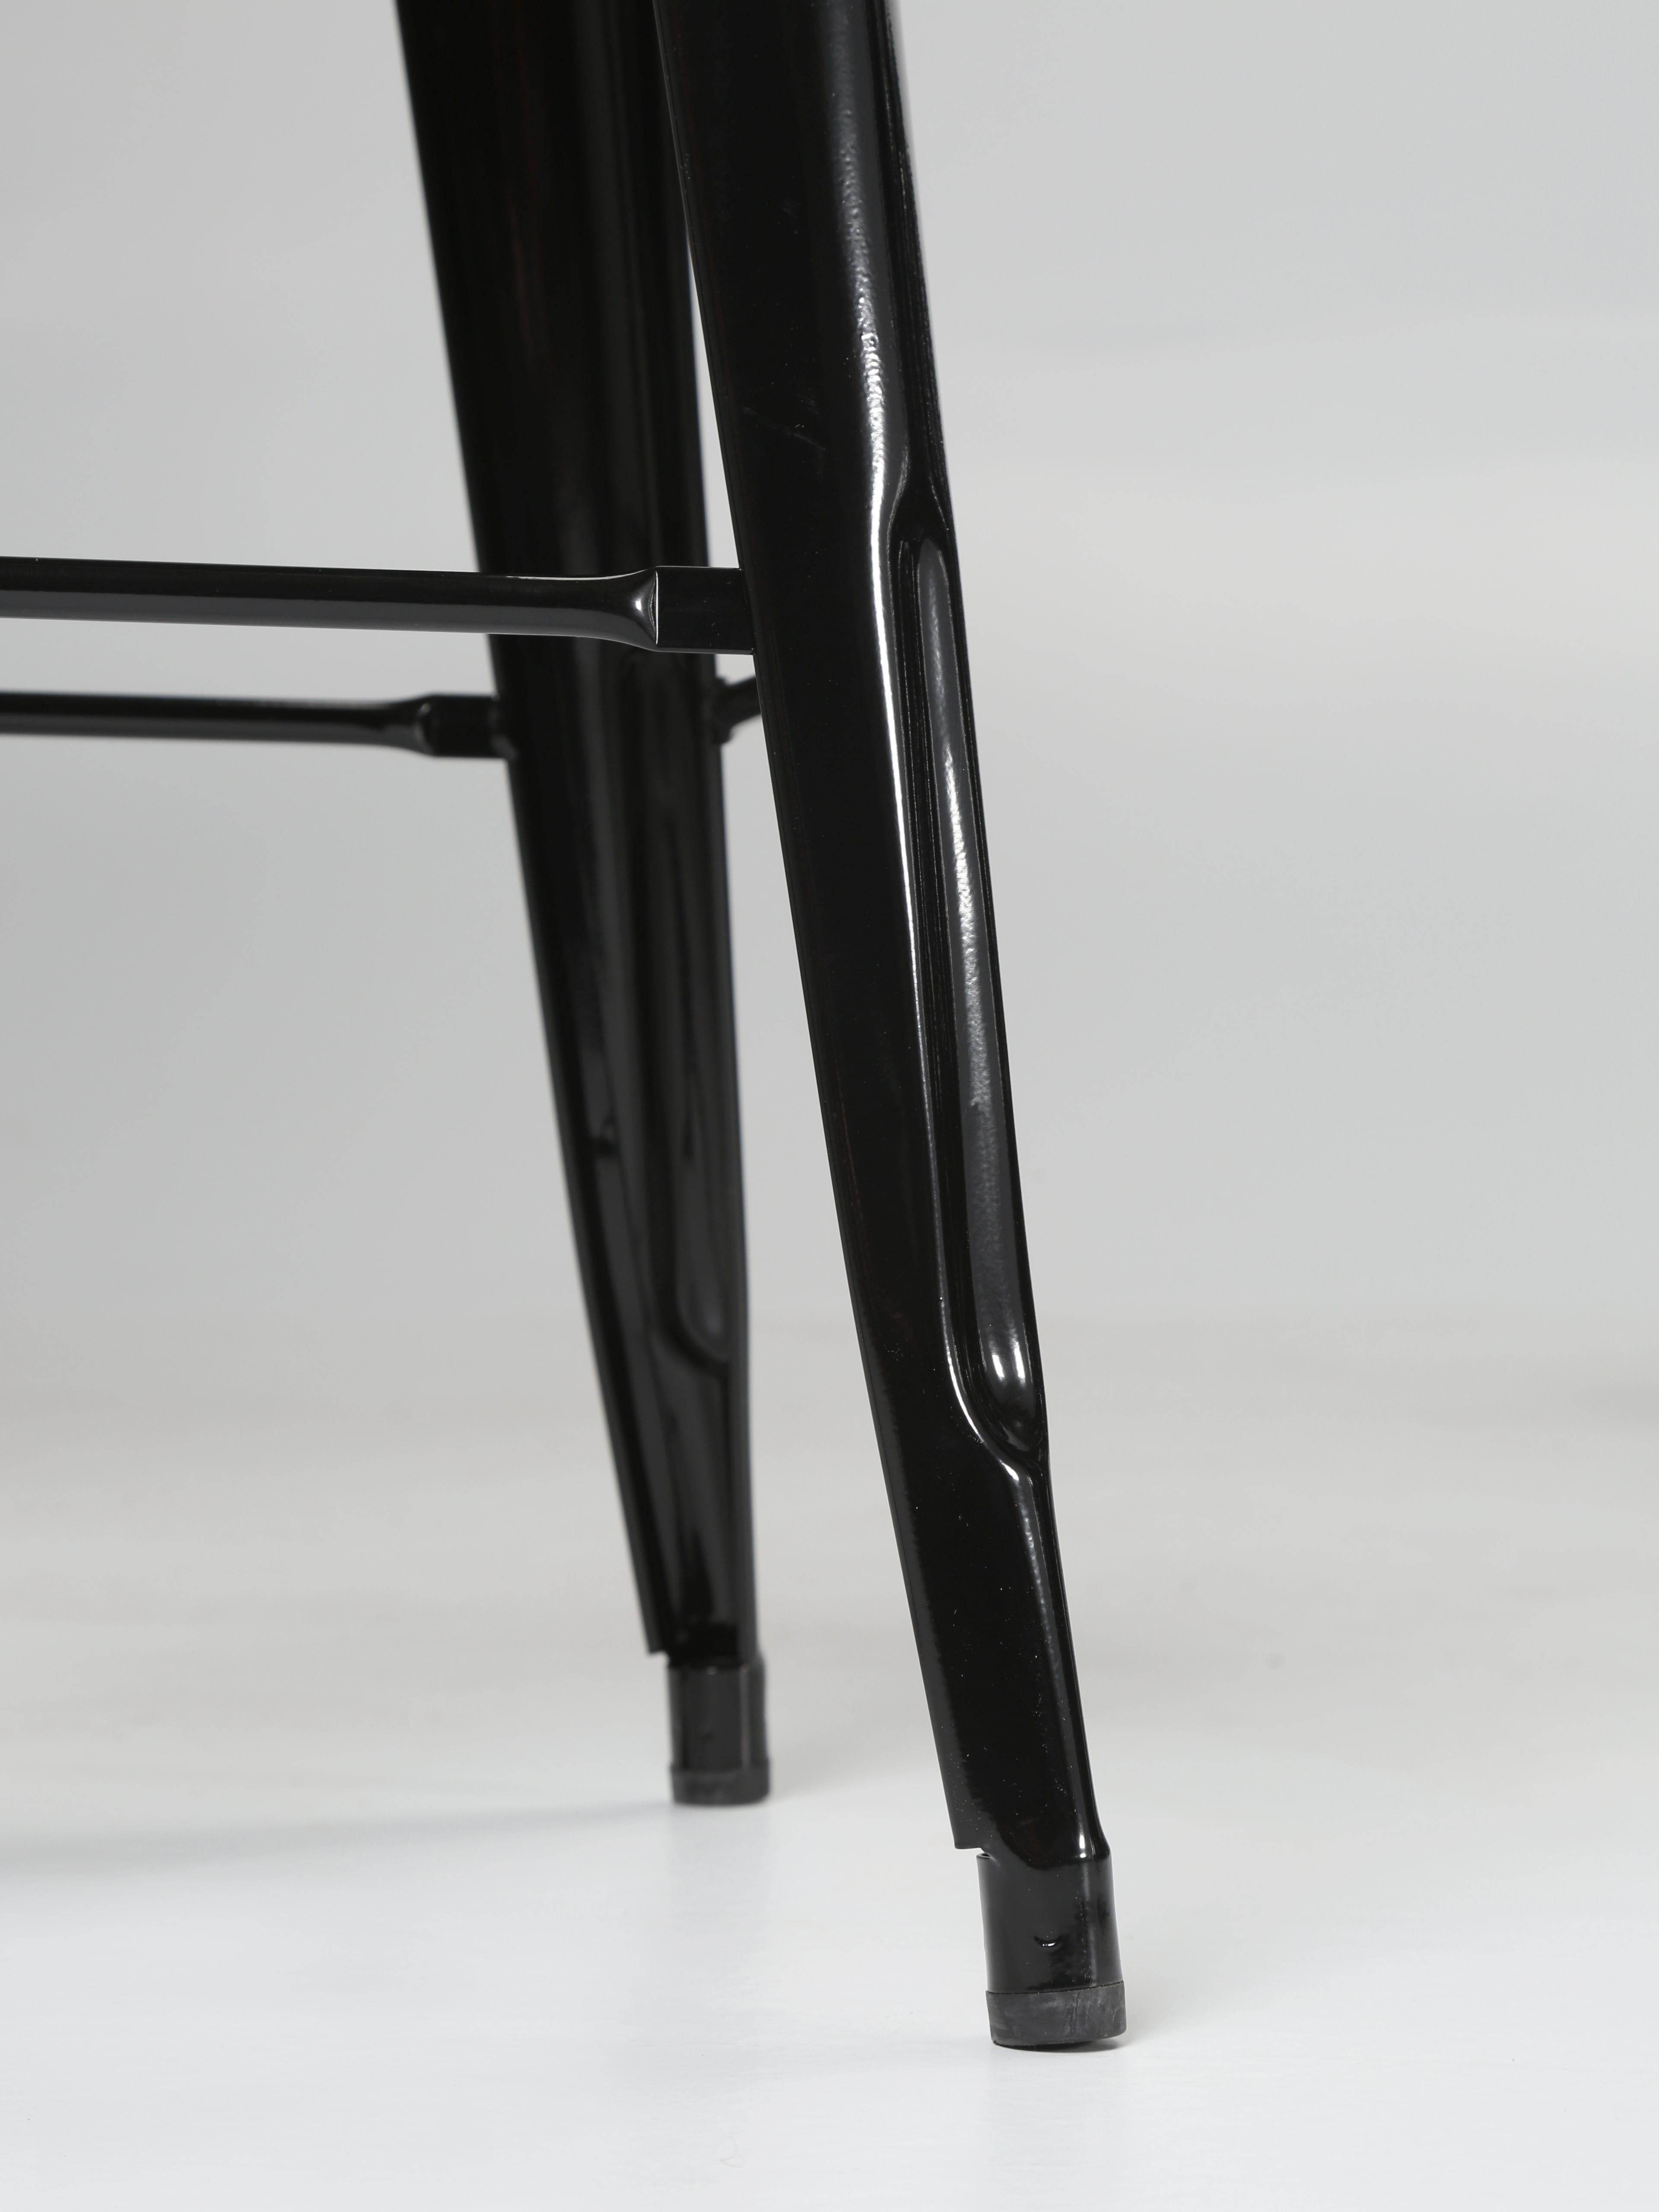 Powder-Coated French Made Genuine Tolix High Bar Height Stools in Black Hundreds in Stock For Sale